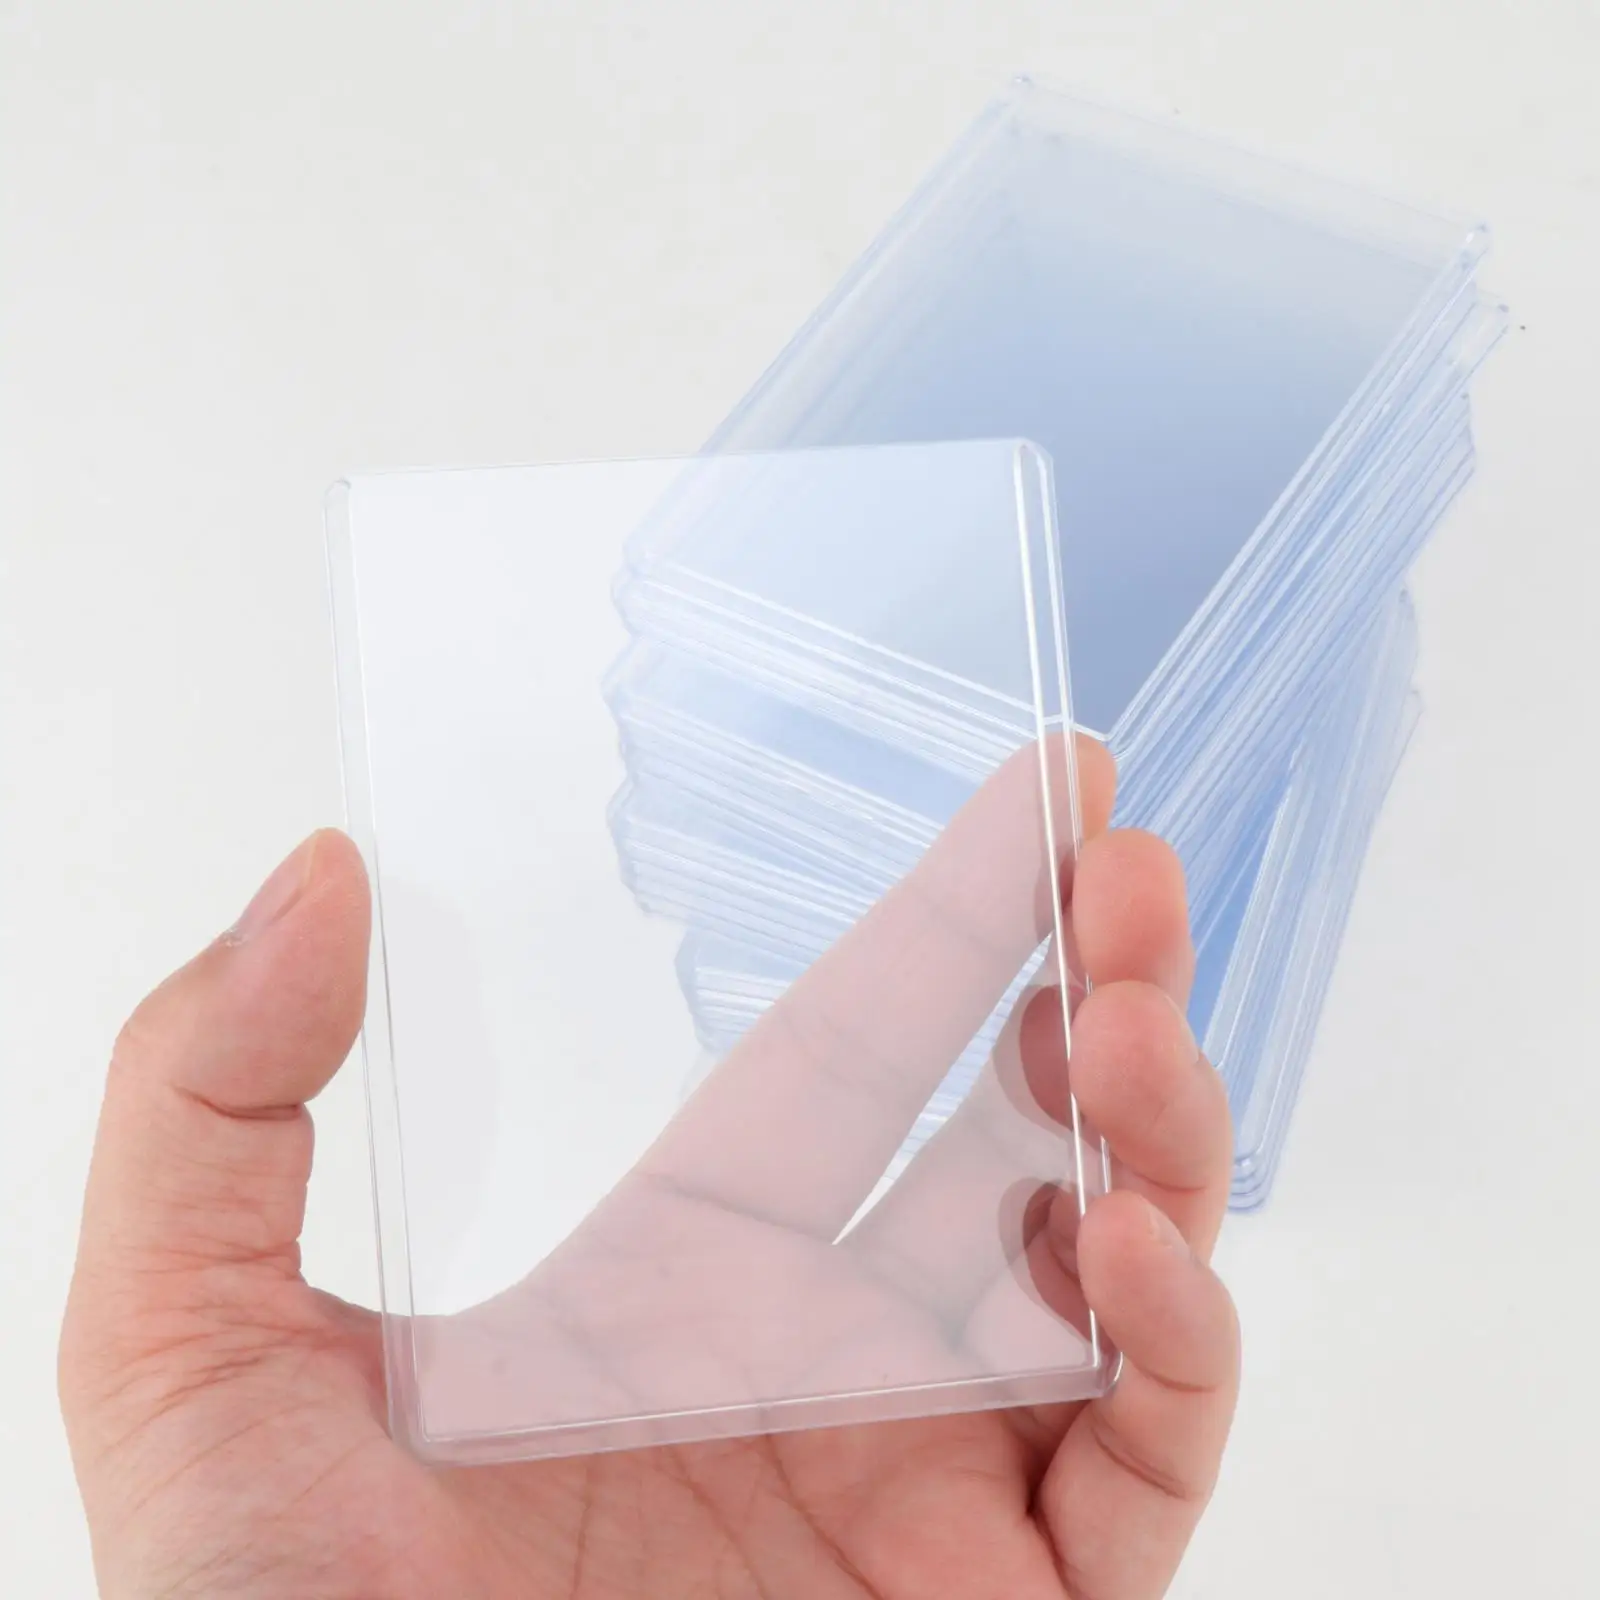 25 Pieces Card Holder Lightweight Protective Transparent Card Sleeves for Baseball Football Basketball Cards Gathering Cards